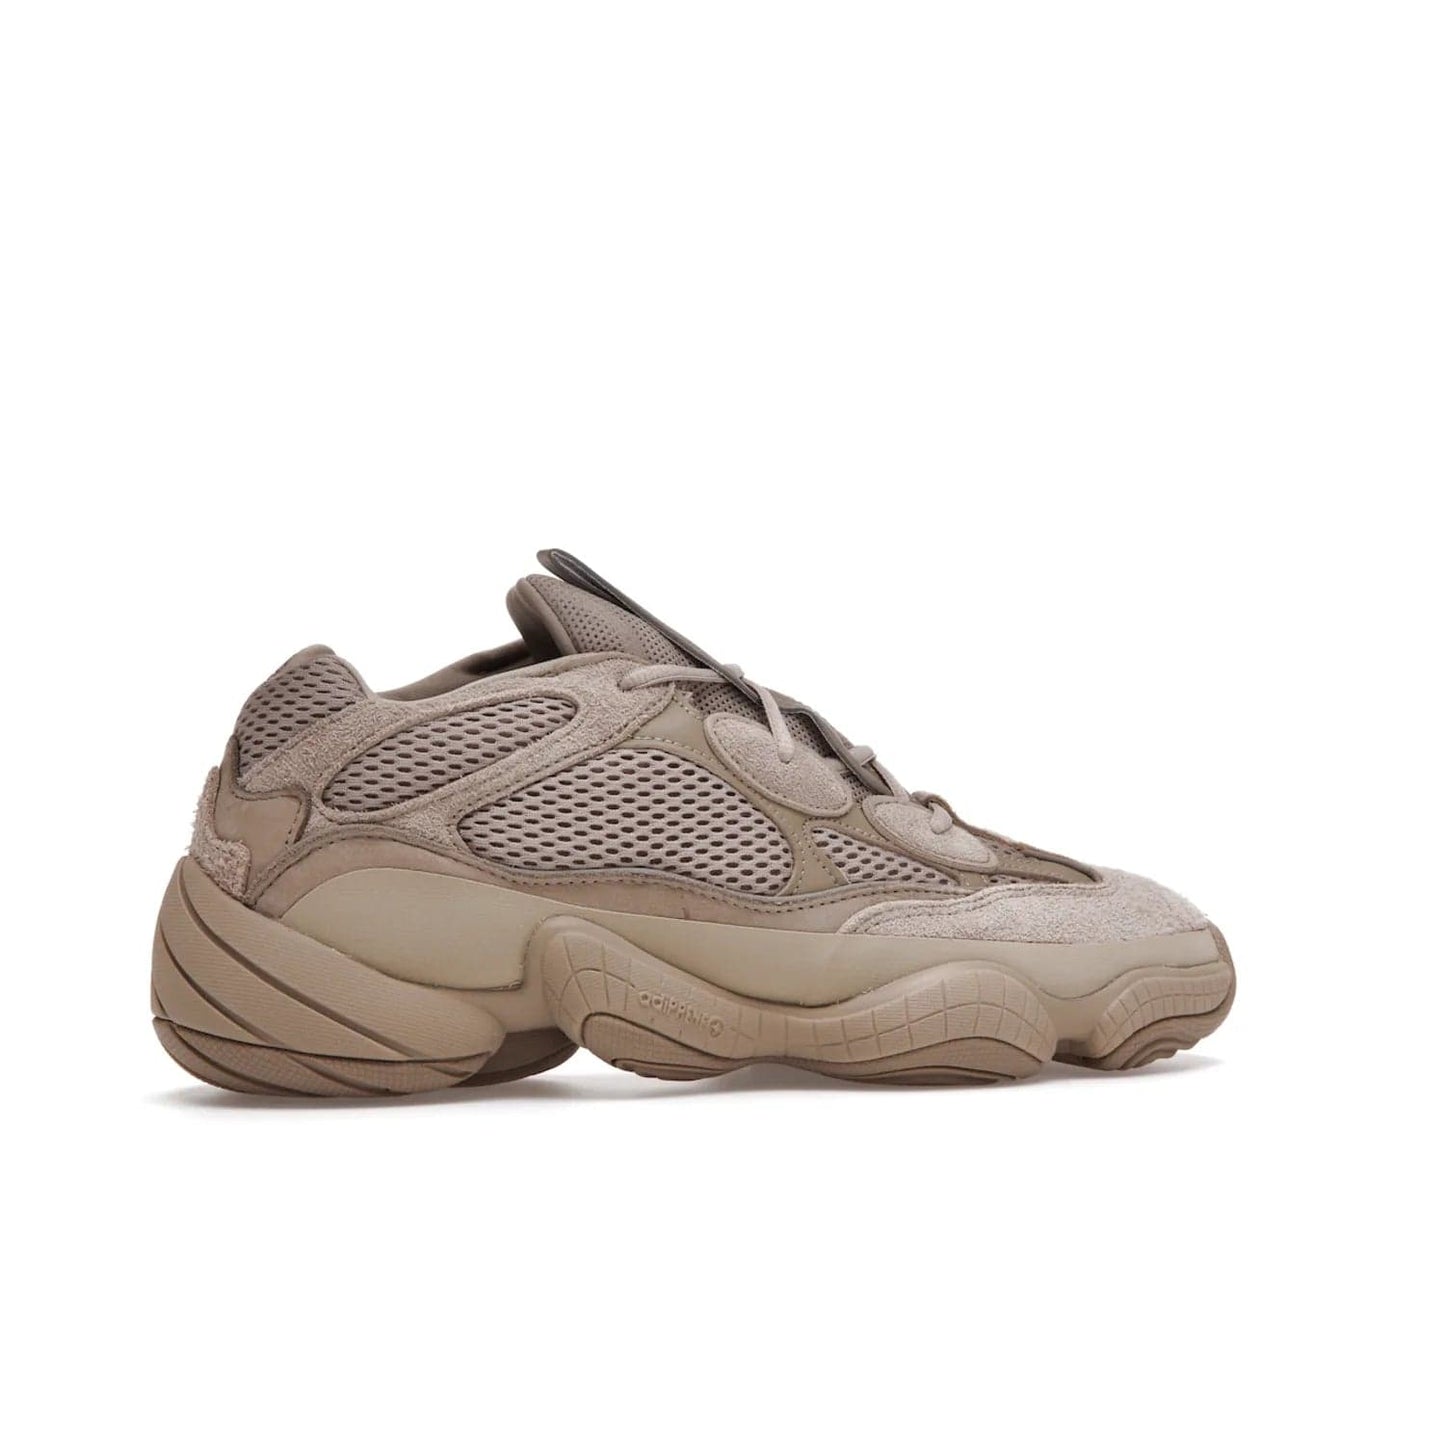 adidas Yeezy 500 Taupe Light - Image 35 - Only at www.BallersClubKickz.com - The adidas Yeezy 500 Taupe Light combines mesh, leather, and suede, with a durable adiPRENE sole for an eye-catching accessory. Reflective piping adds the perfect finishing touches to this unique silhouette. Ideal for any wardrobe, releasing in June 2021.